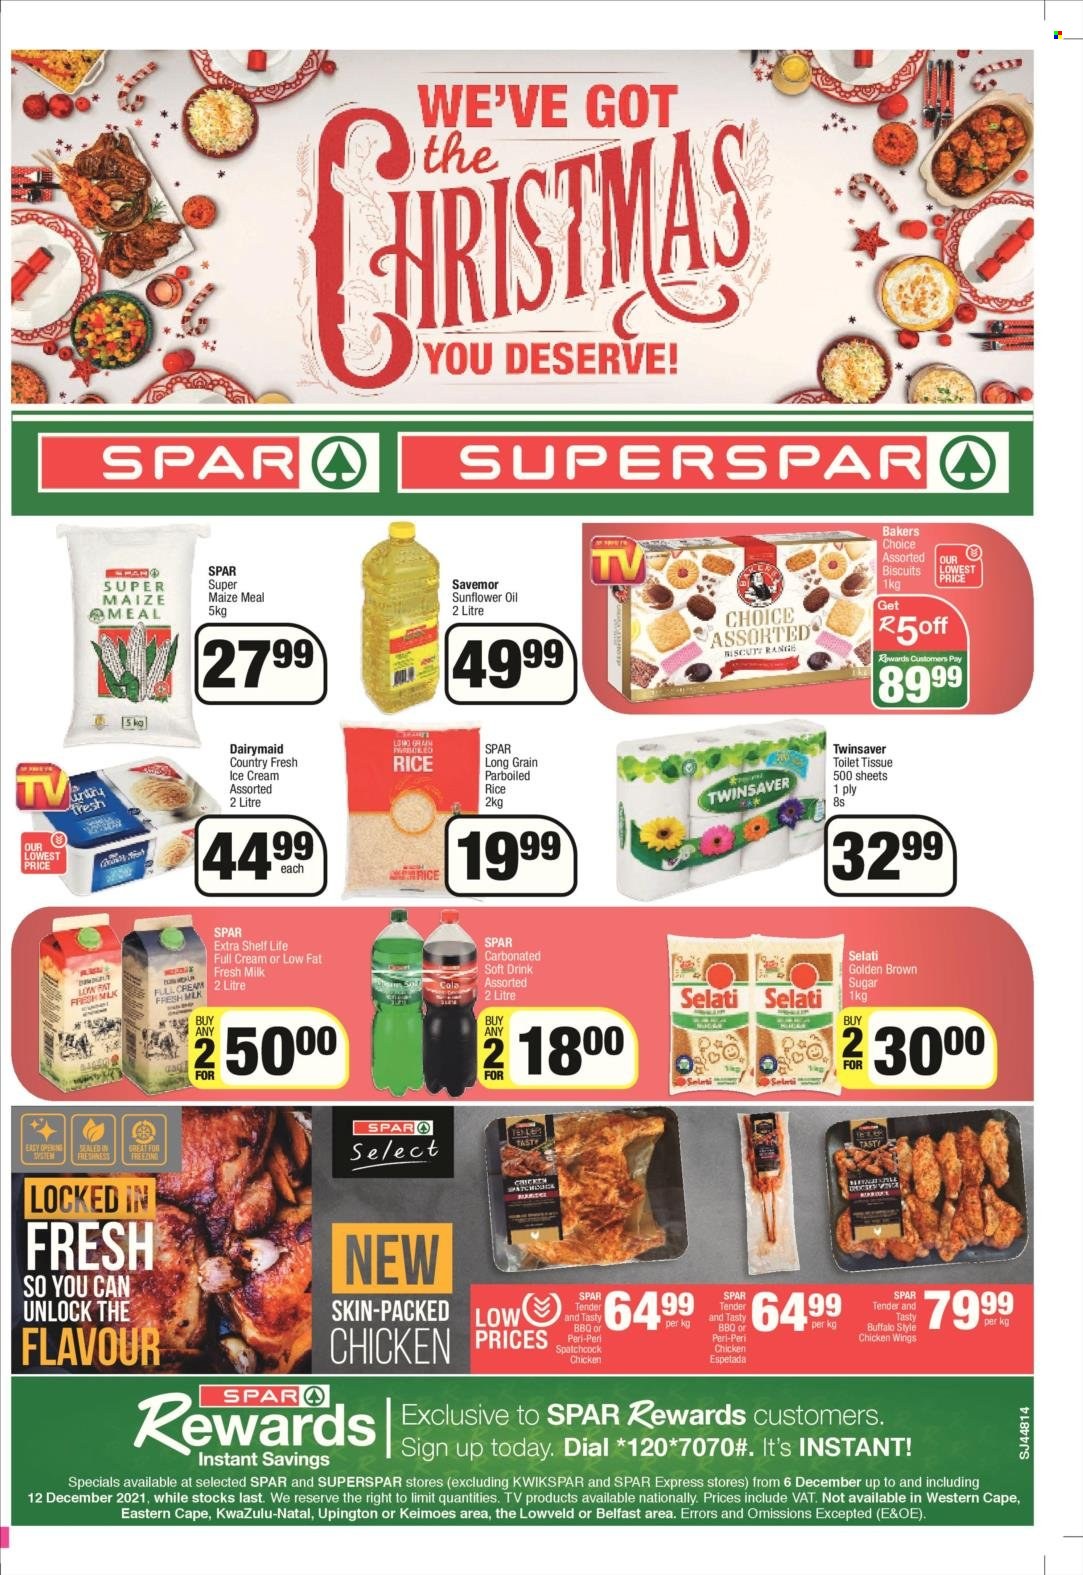 SPAR catalogue  - 06/12/2021 - 12/12/2021 - Sales products - milk, ice cream, chicken wings, biscuit, cane sugar, maize meal, rice, sunflower oil, oil, soft drink, carbonated soft drink, spatchcock chicken, toilet paper, Dial, Bakers. Page 1.